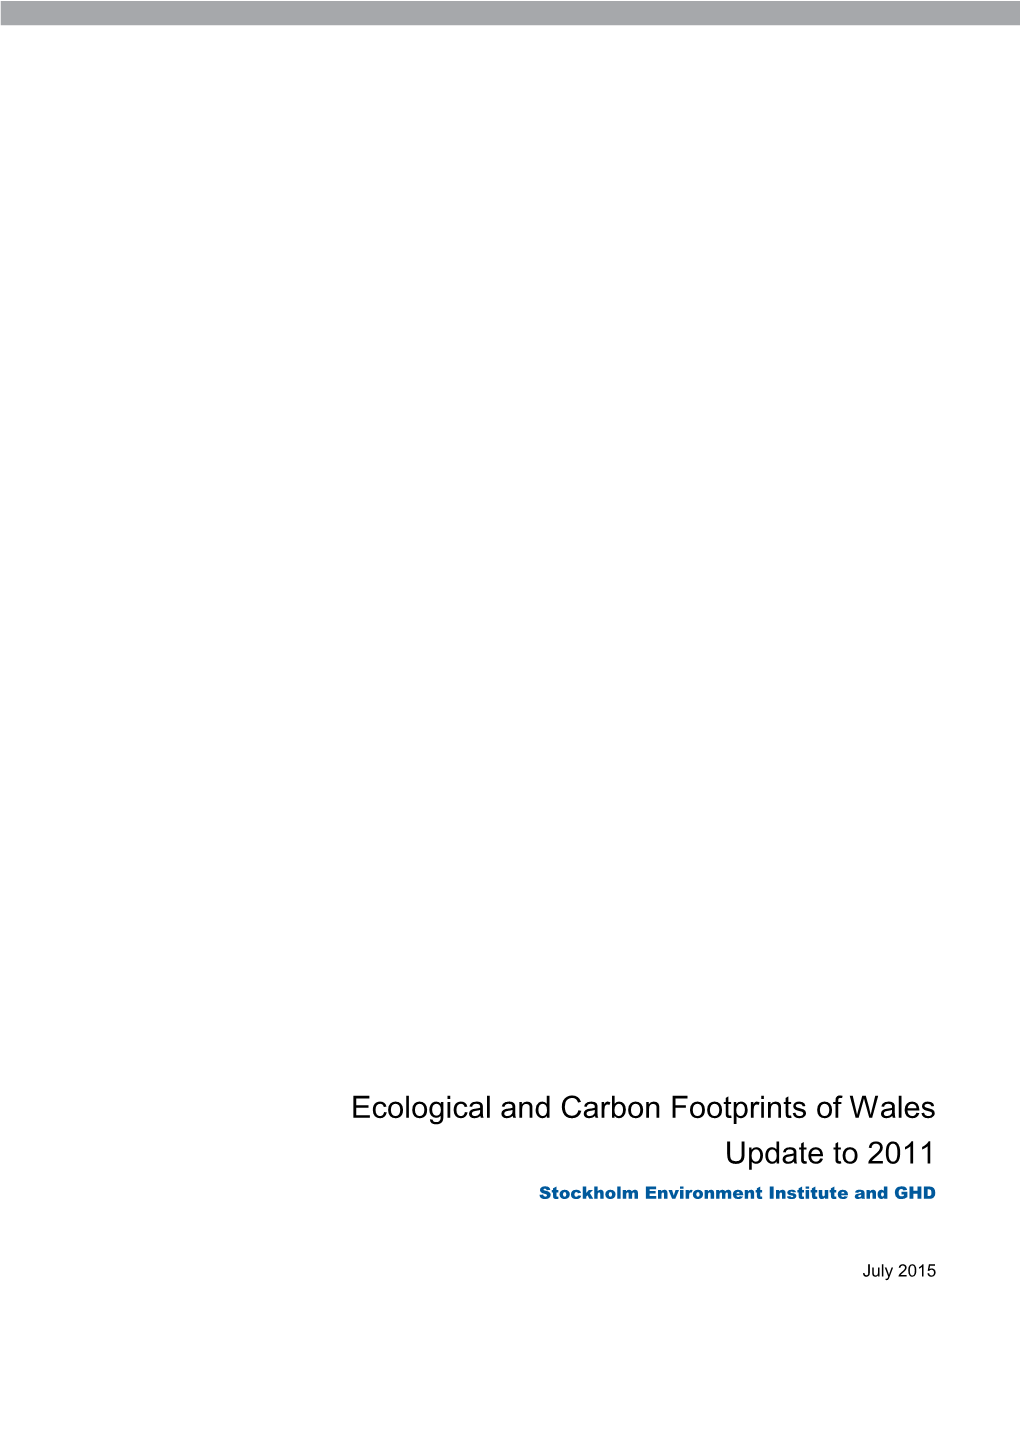 Ecological and Carbon Footprint of Wales Report , File Type